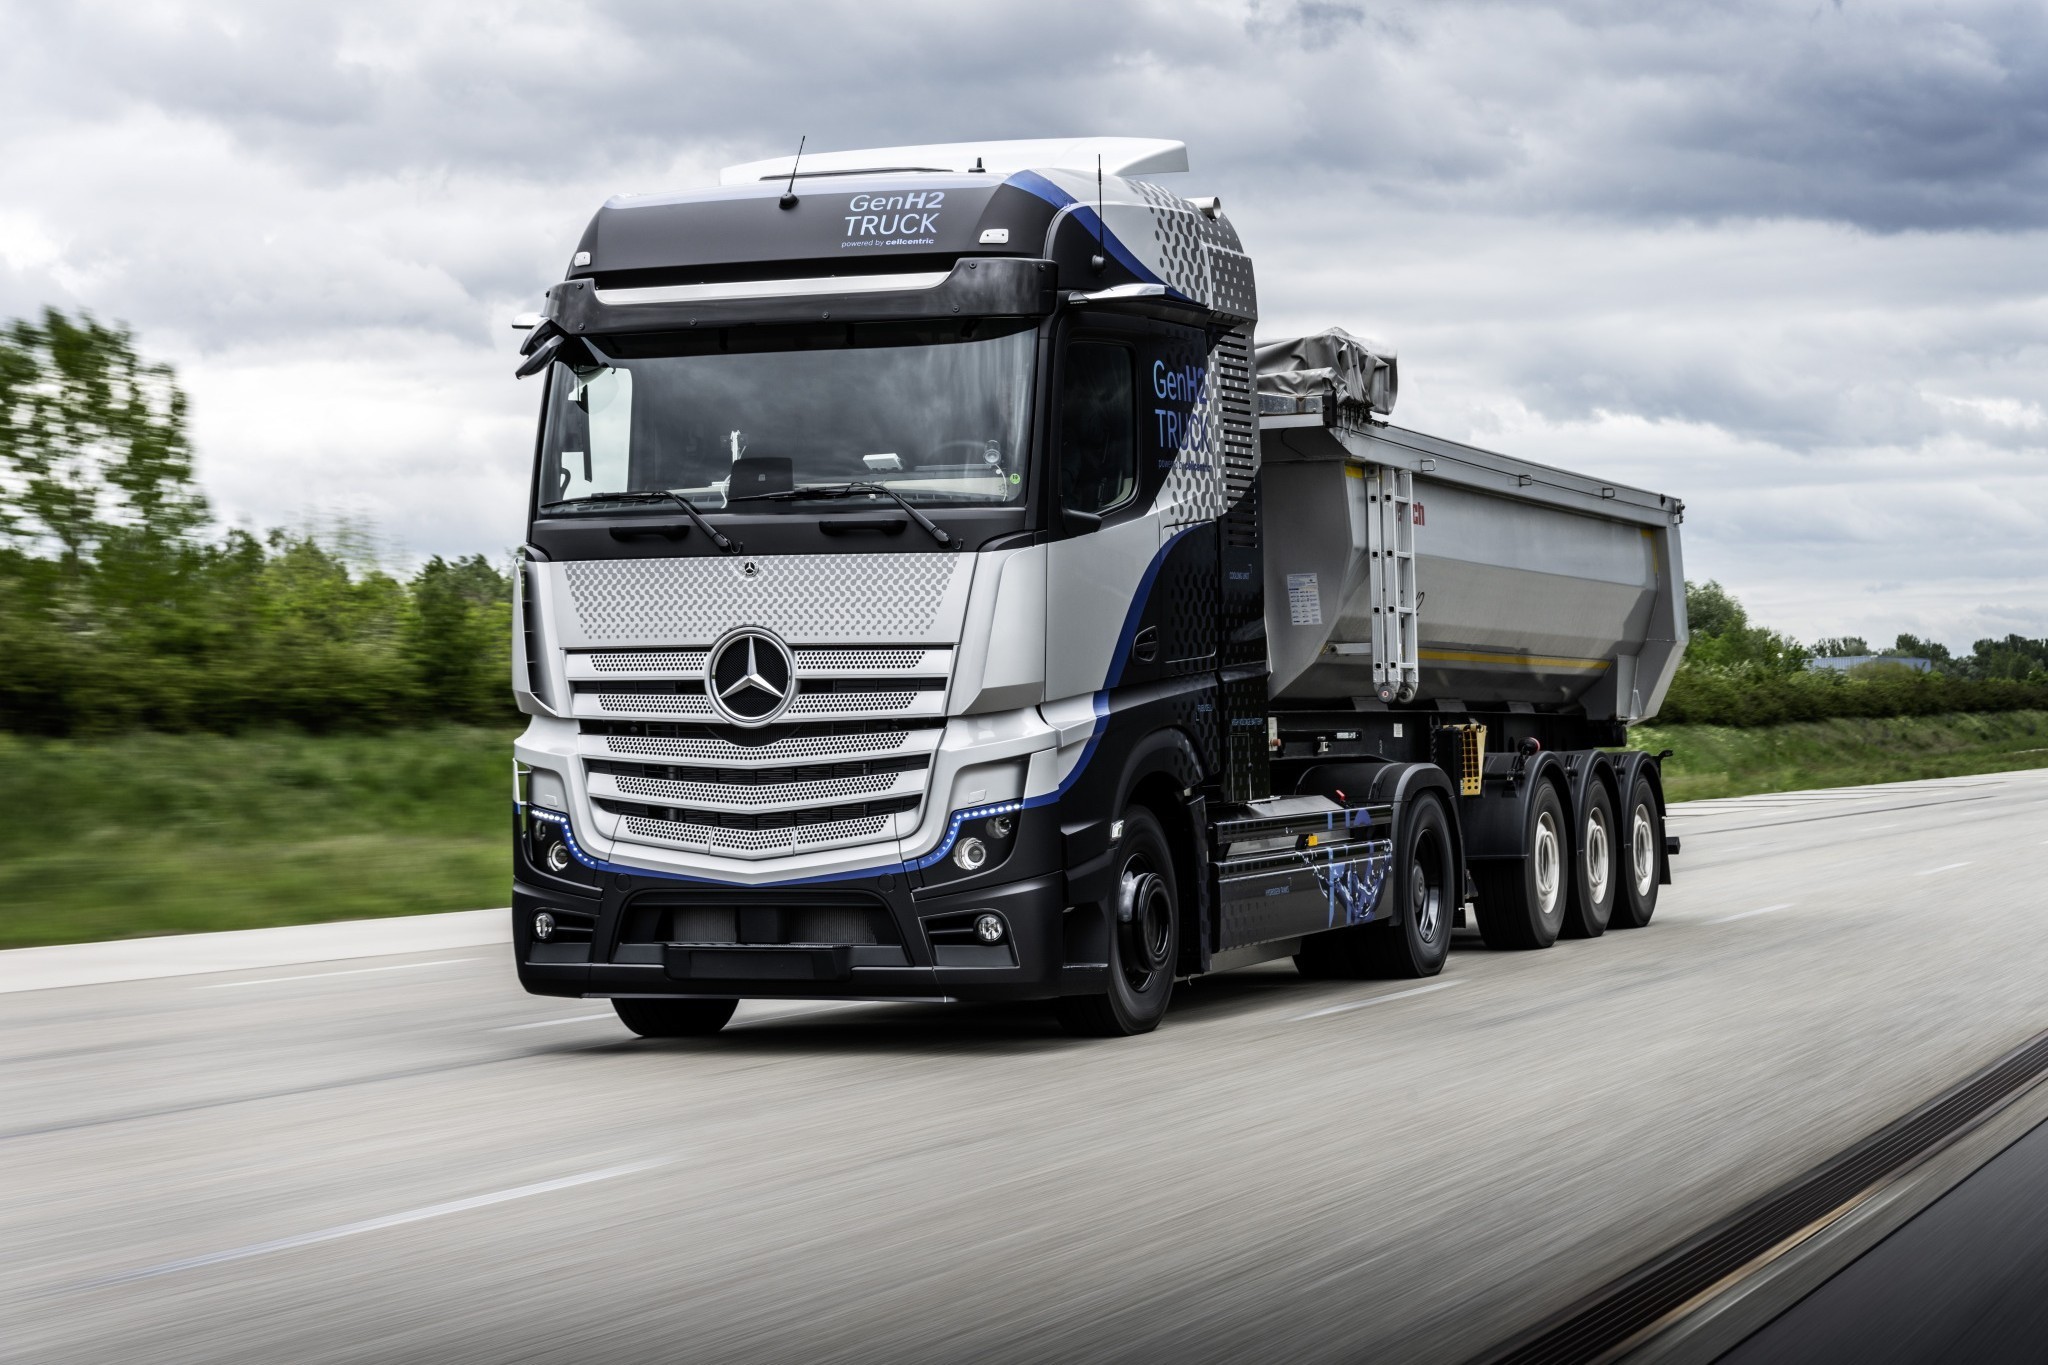 FuelCell MercedesBenz GenH2 Truck Passes Challenging Tests With